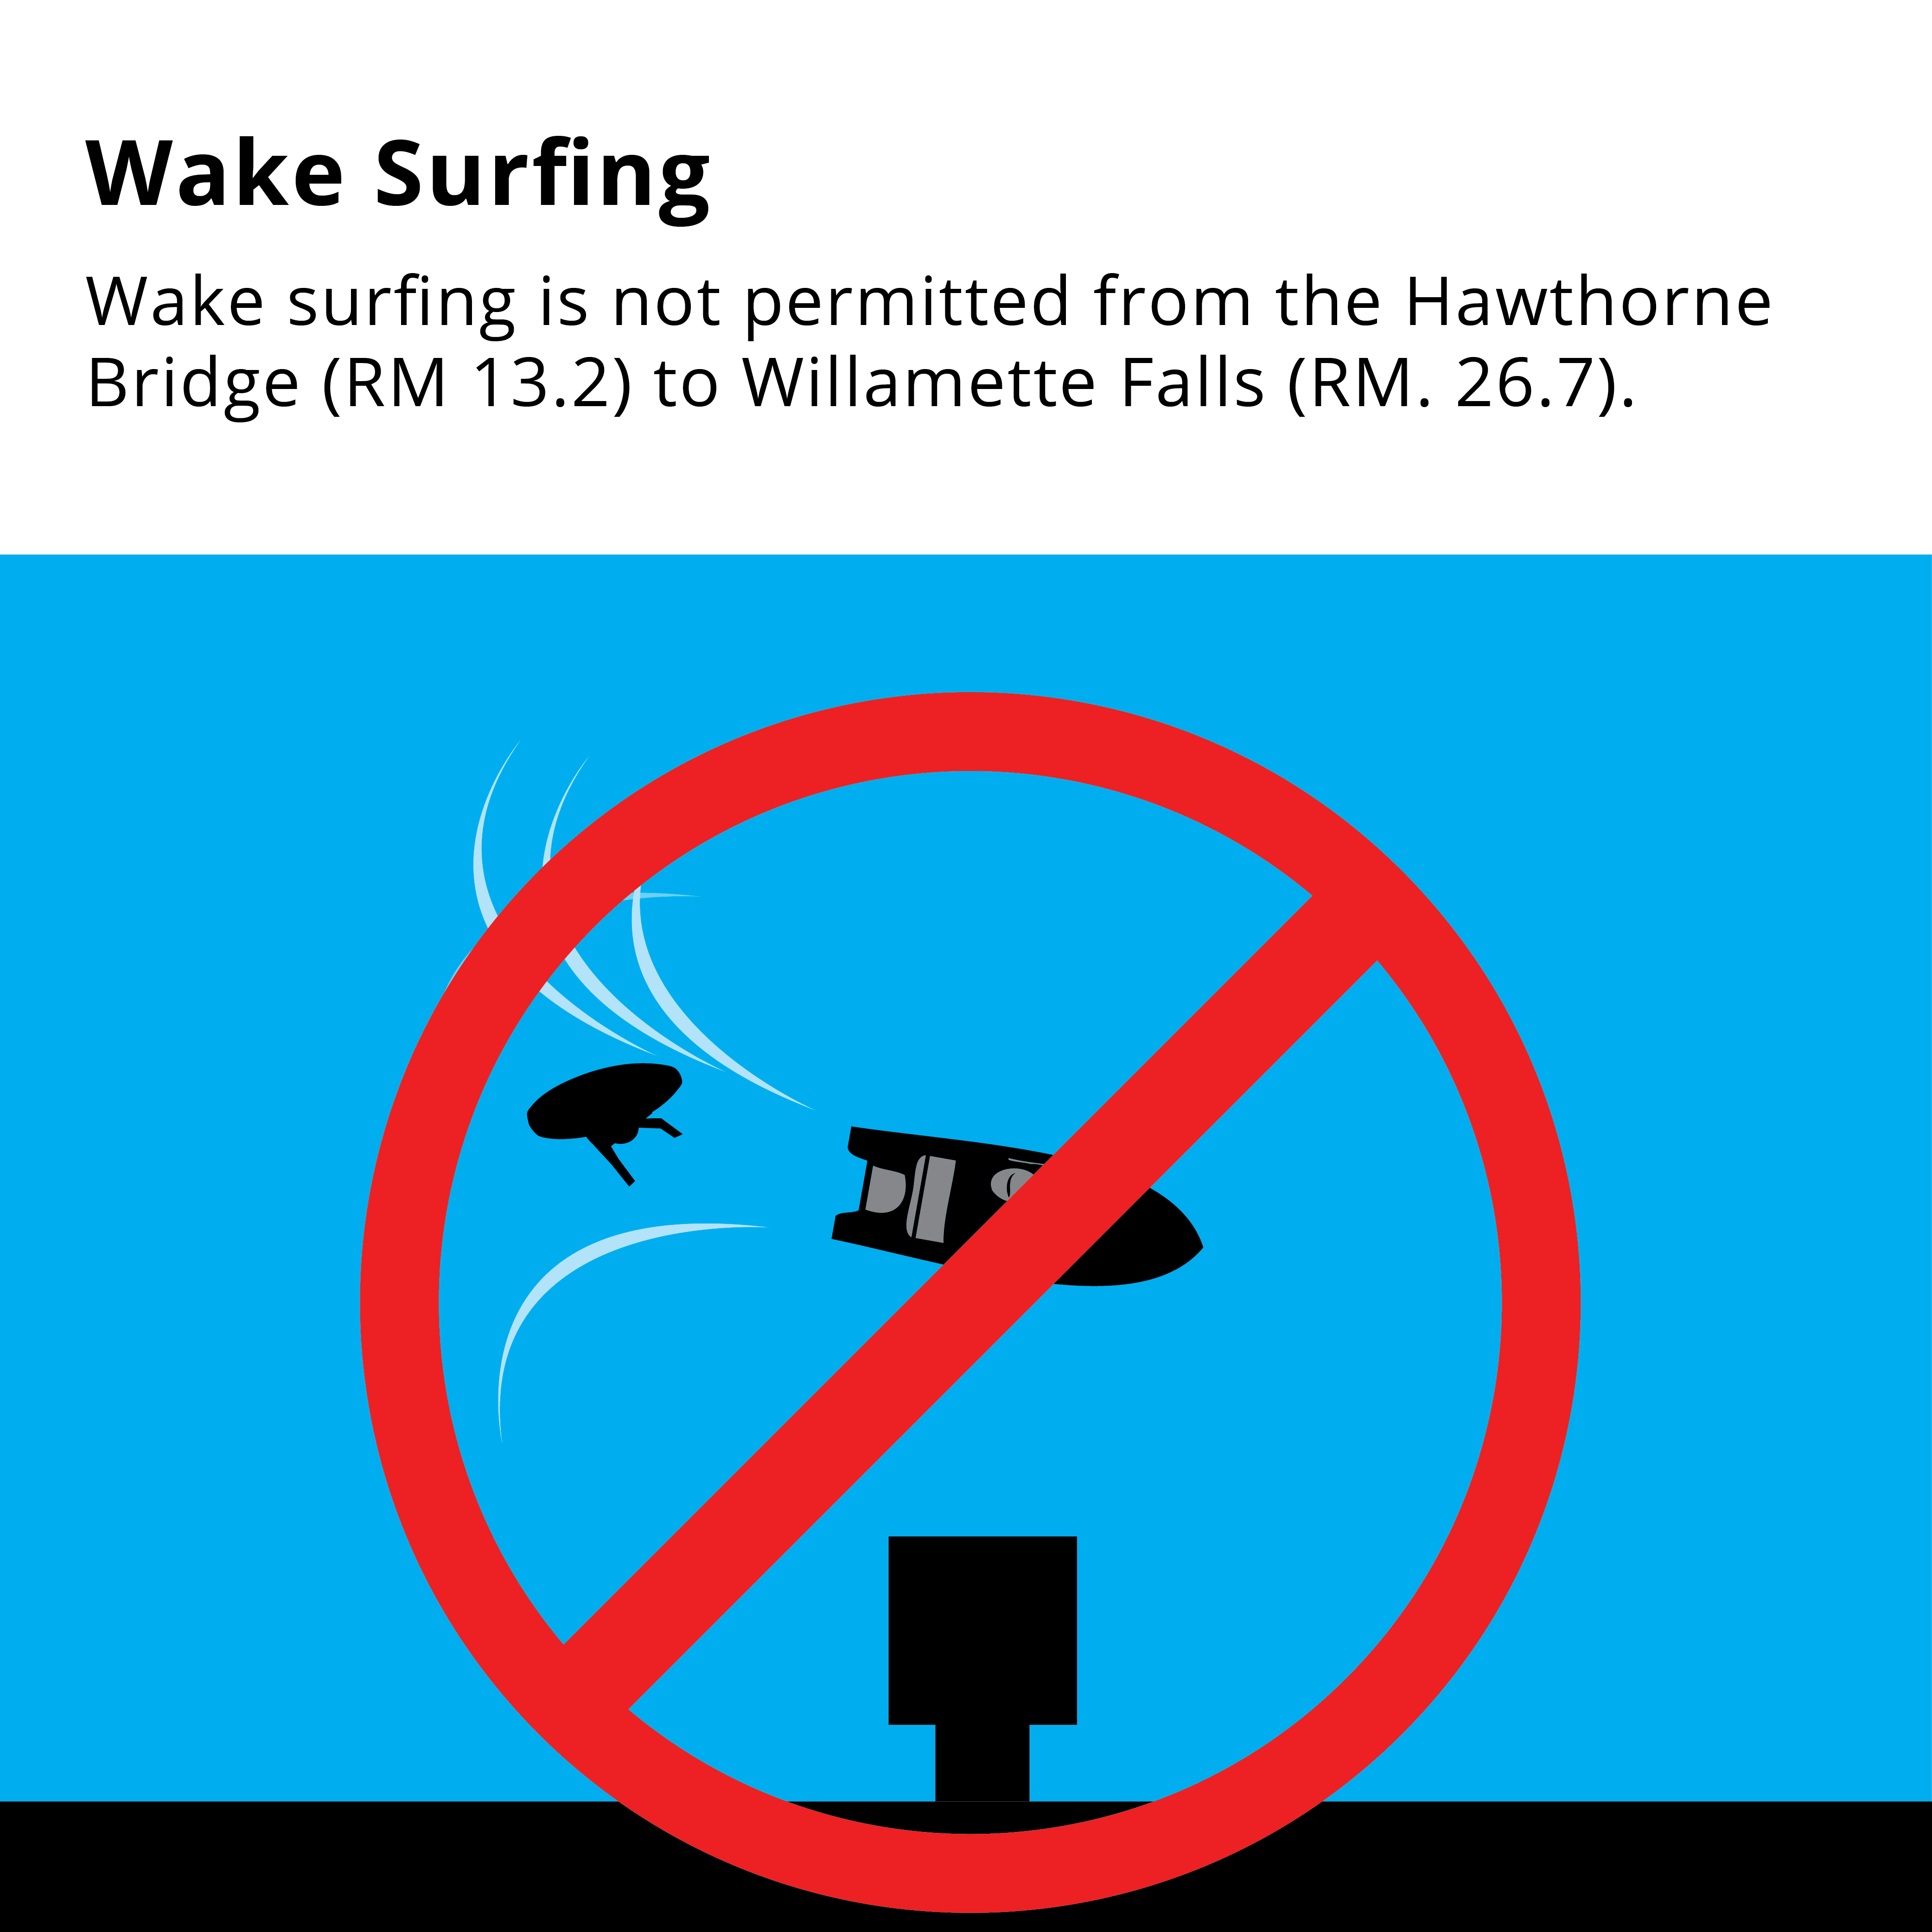 Wake surfing is prohibited